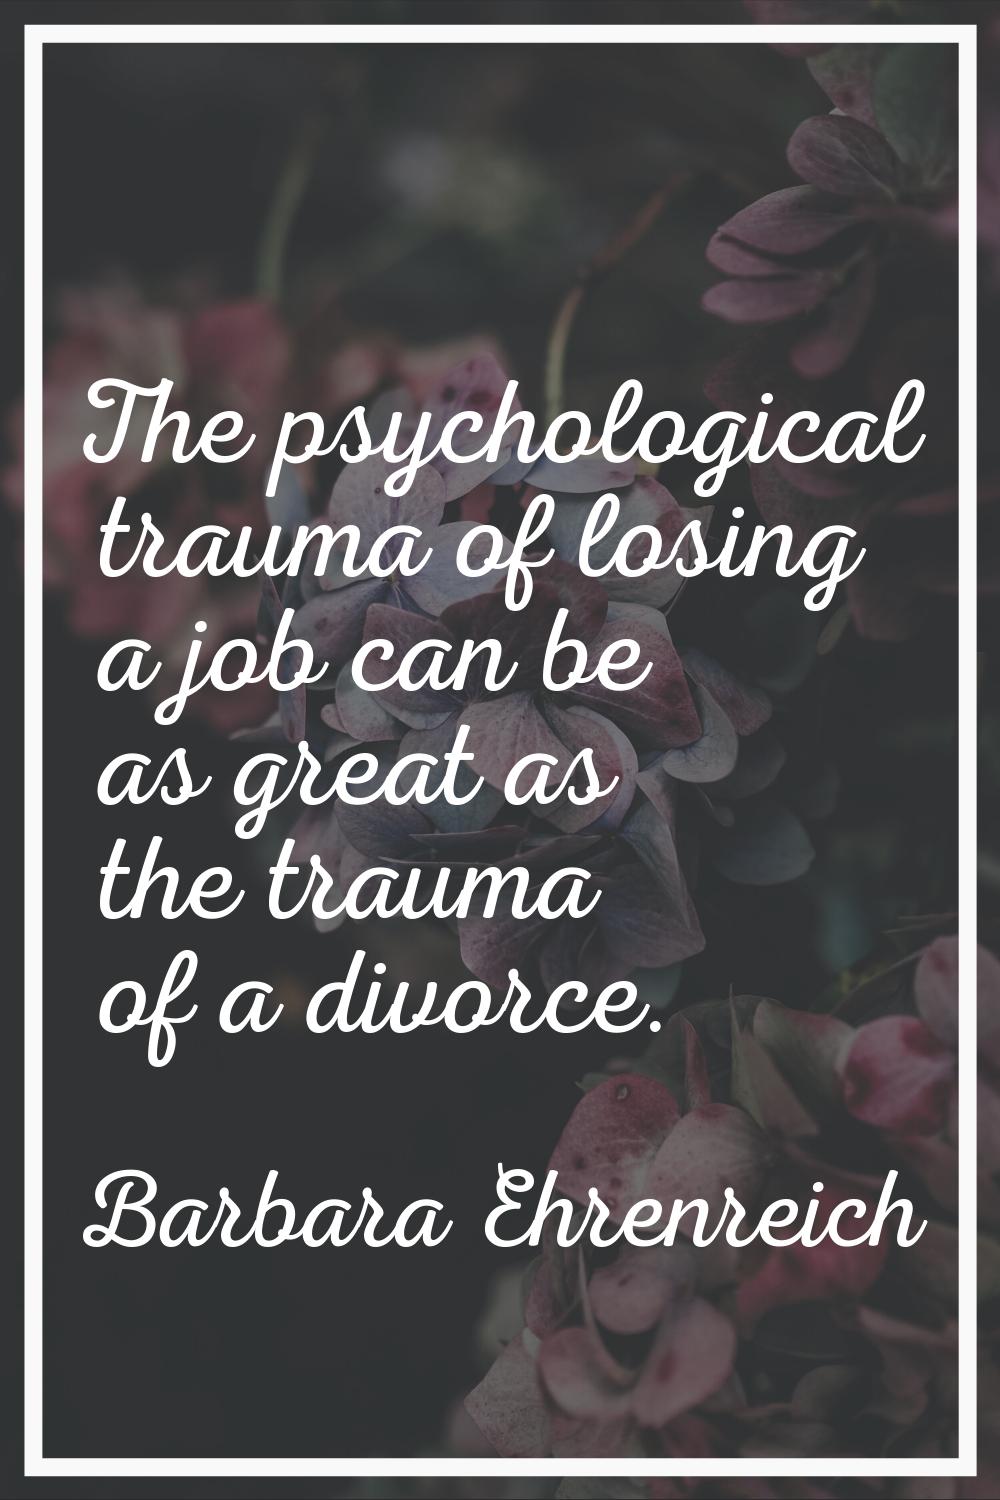 The psychological trauma of losing a job can be as great as the trauma of a divorce.